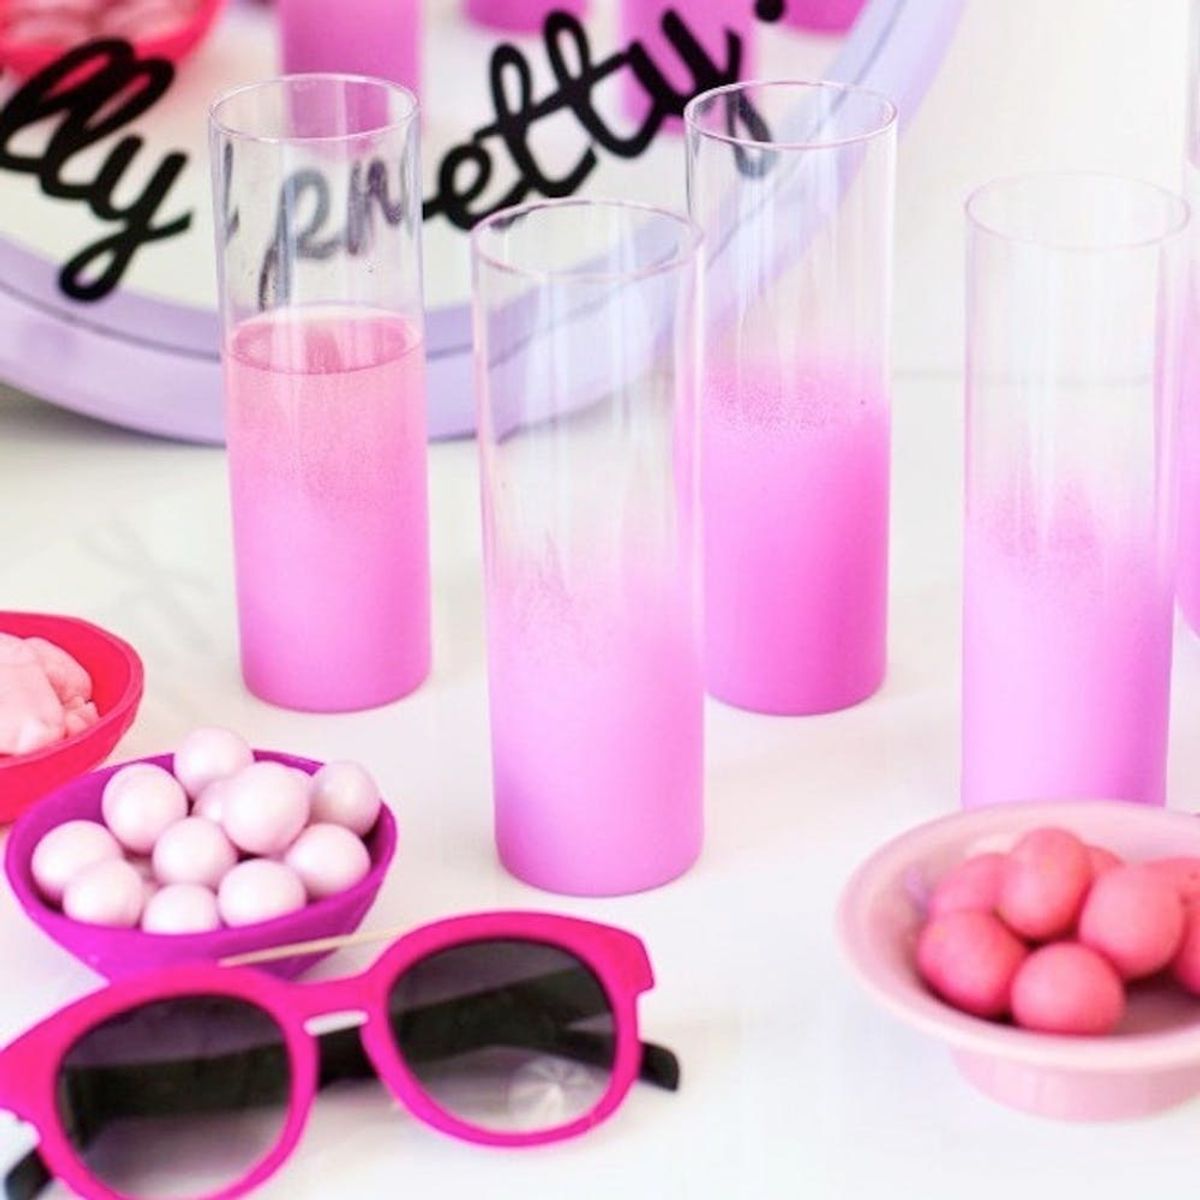 What to Make This Weekend: Ombré Glasses, Daisy Sunglasses + More